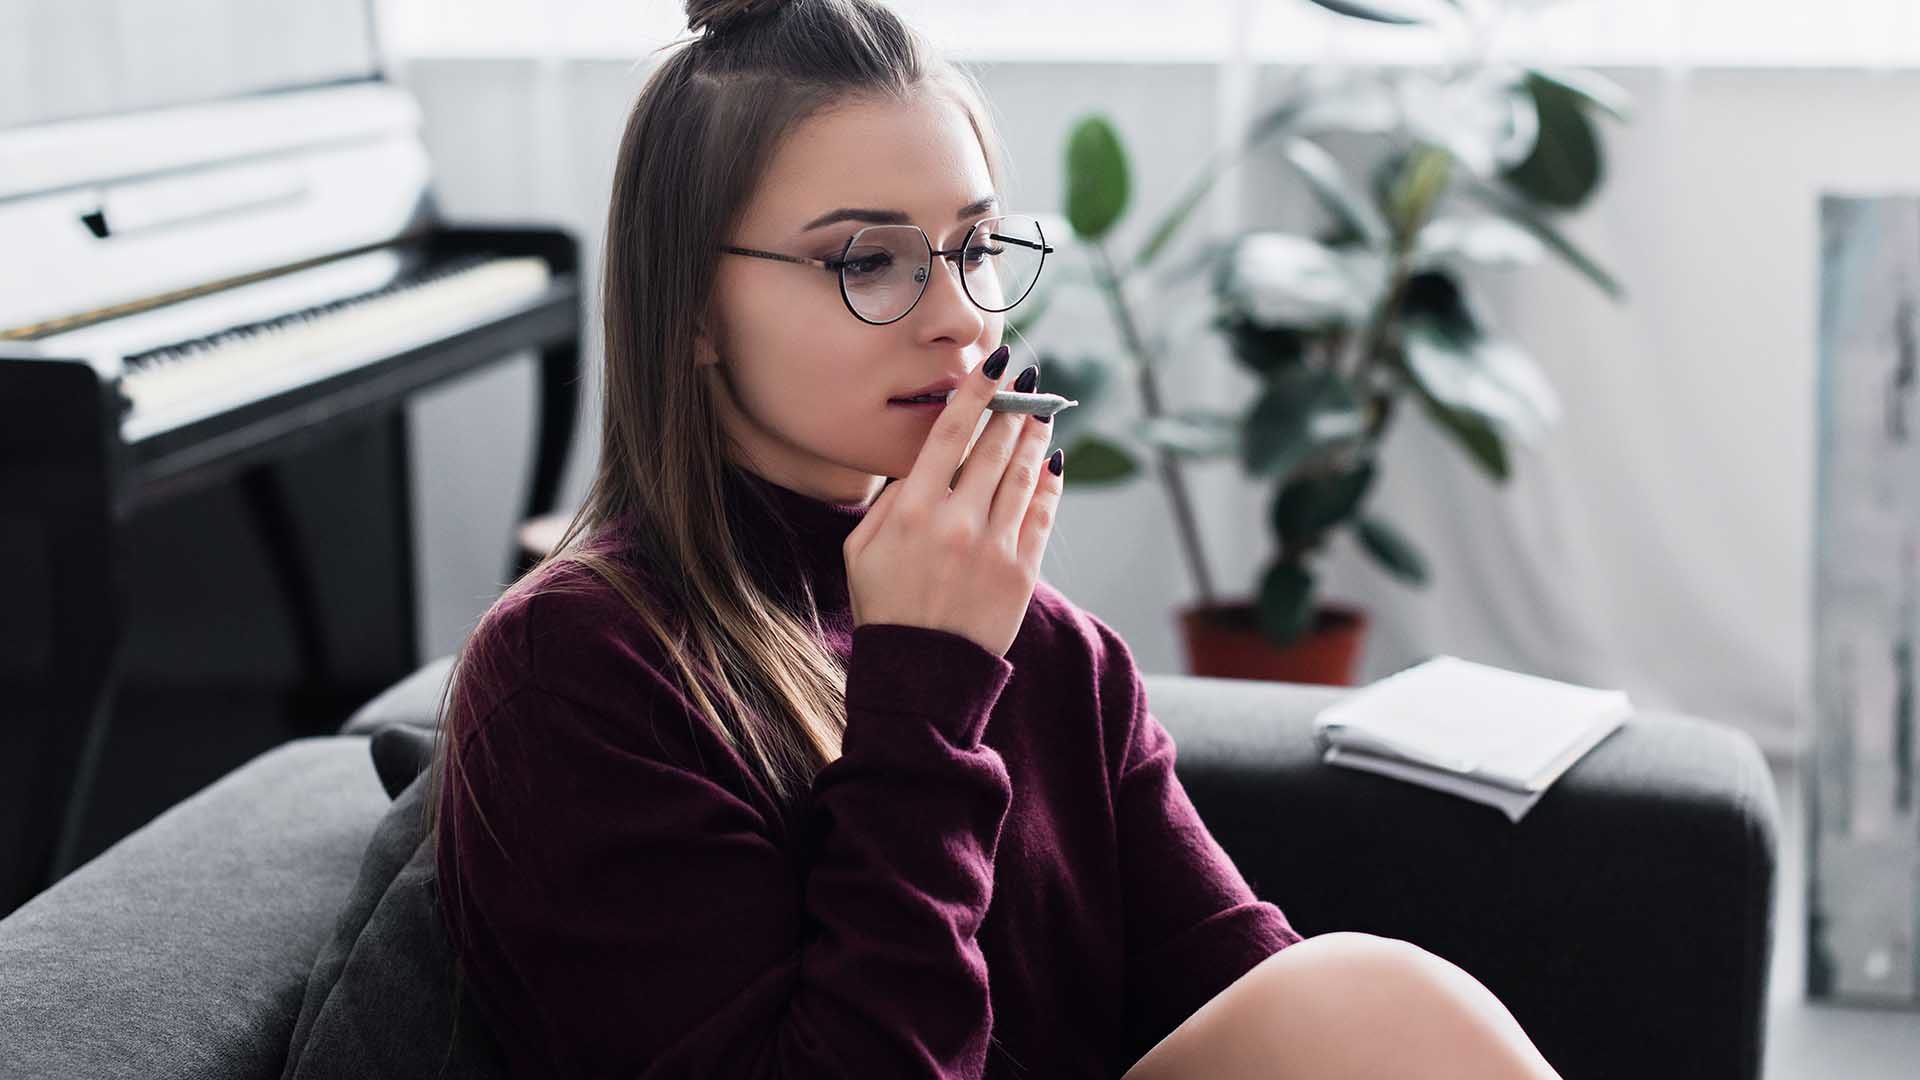 beautiful girl sitting on couch and smoking marijuana joint in living room